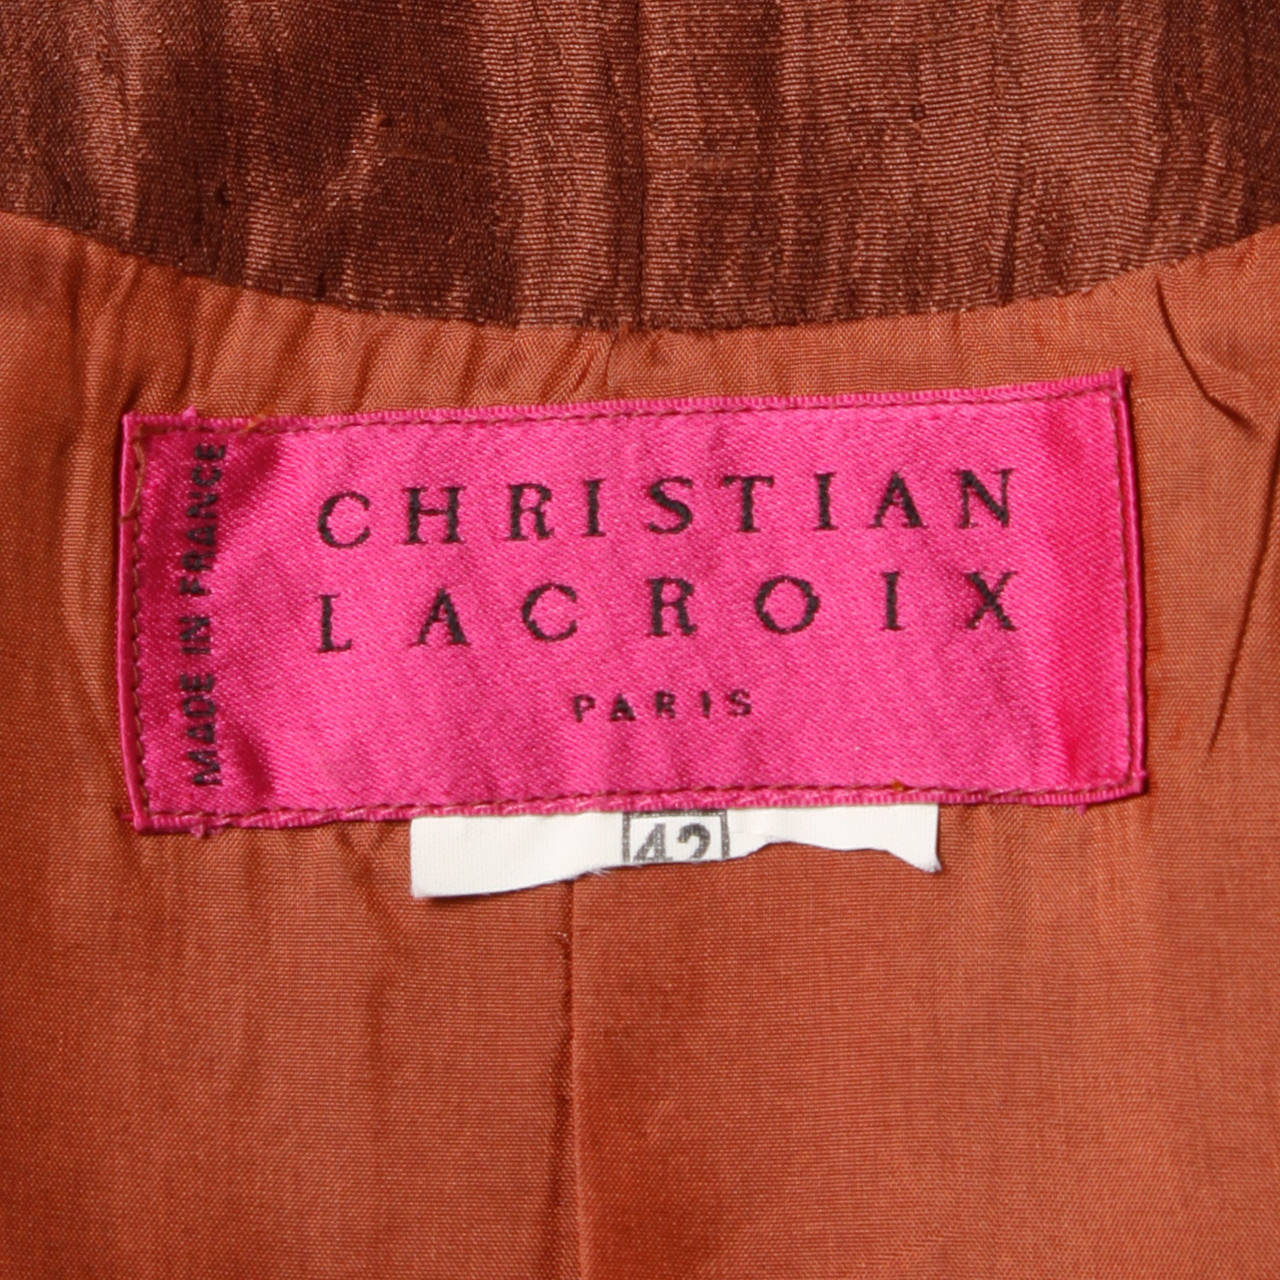 Chocolate brown silk steam punk tuxedo jacket by Christian Lacroix. Unique buttons and flattering cut.

Details:

Fully Lined
Front Button Closure
Marked Size: 42
Estimated Size: M
Colors: Brown/ Bronze
Fabric: Silk
Label: Christian